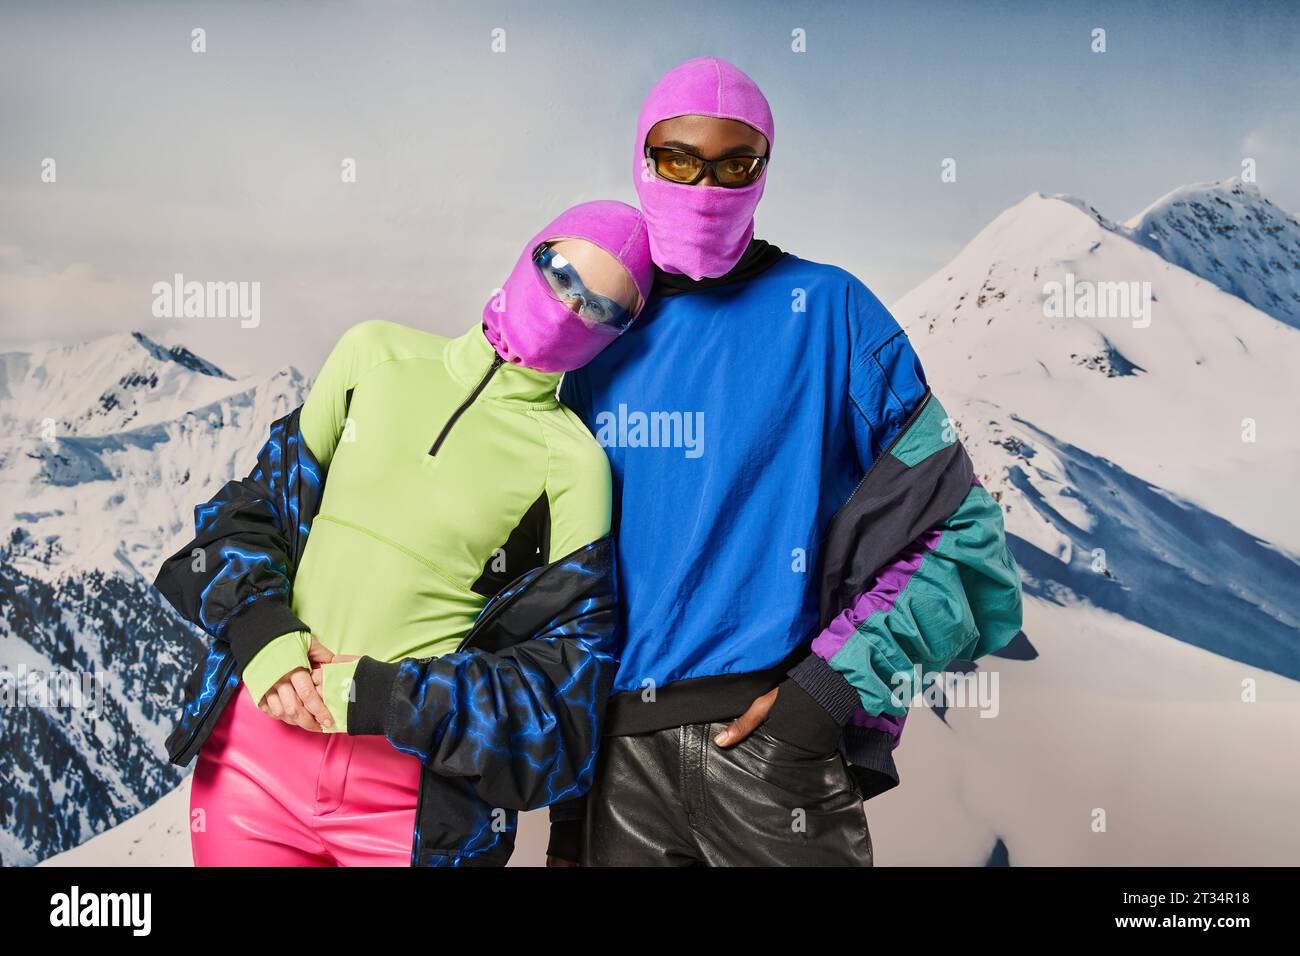 stylish diverse couple in pink balaclavas and sunglasses hugging and posing together, winter concept Stock Photo